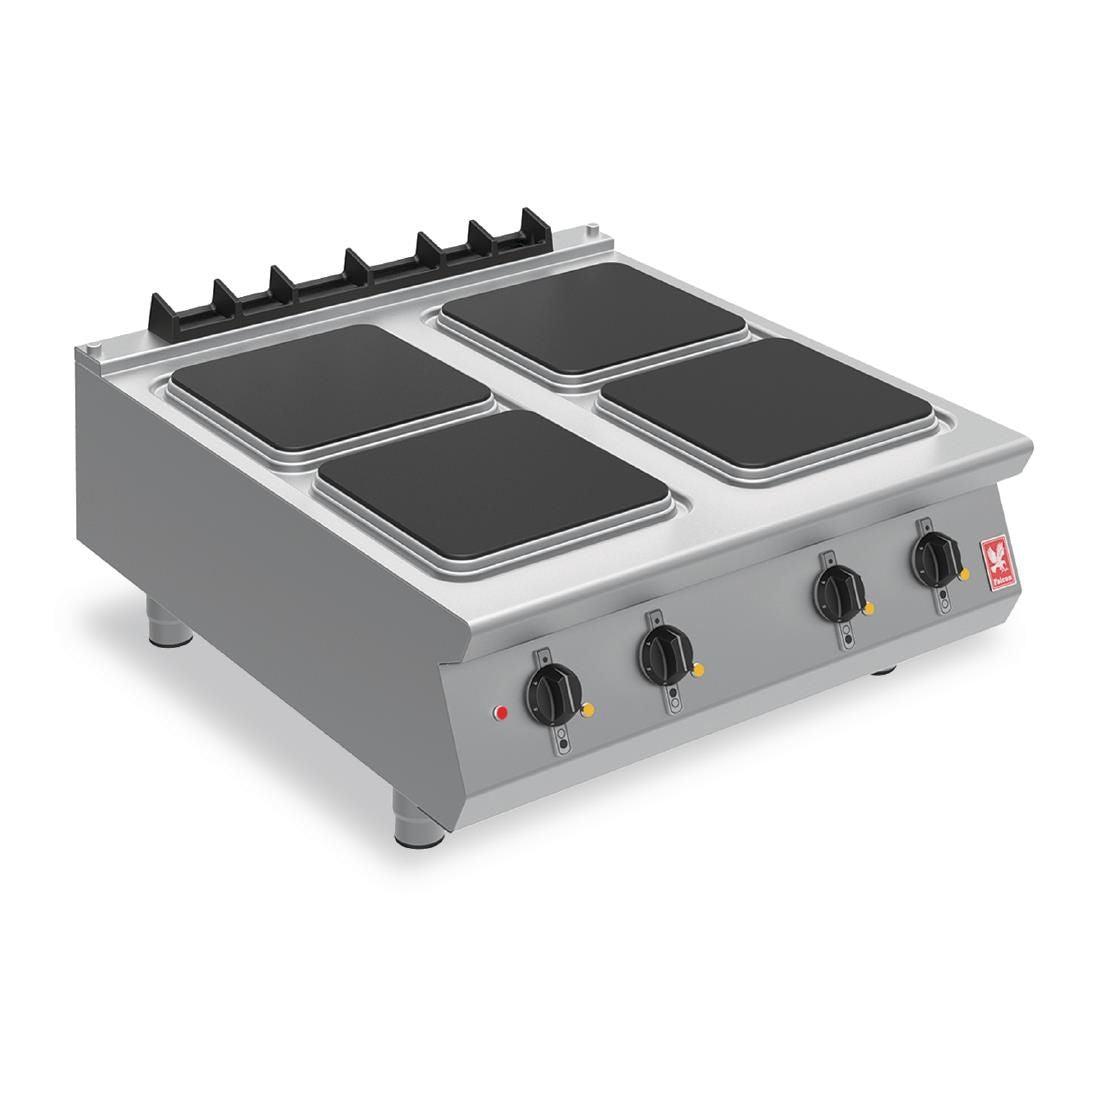 Falcon F900 Four Hotplate Boiling Top E9084 JD Catering Equipment Solutions Ltd